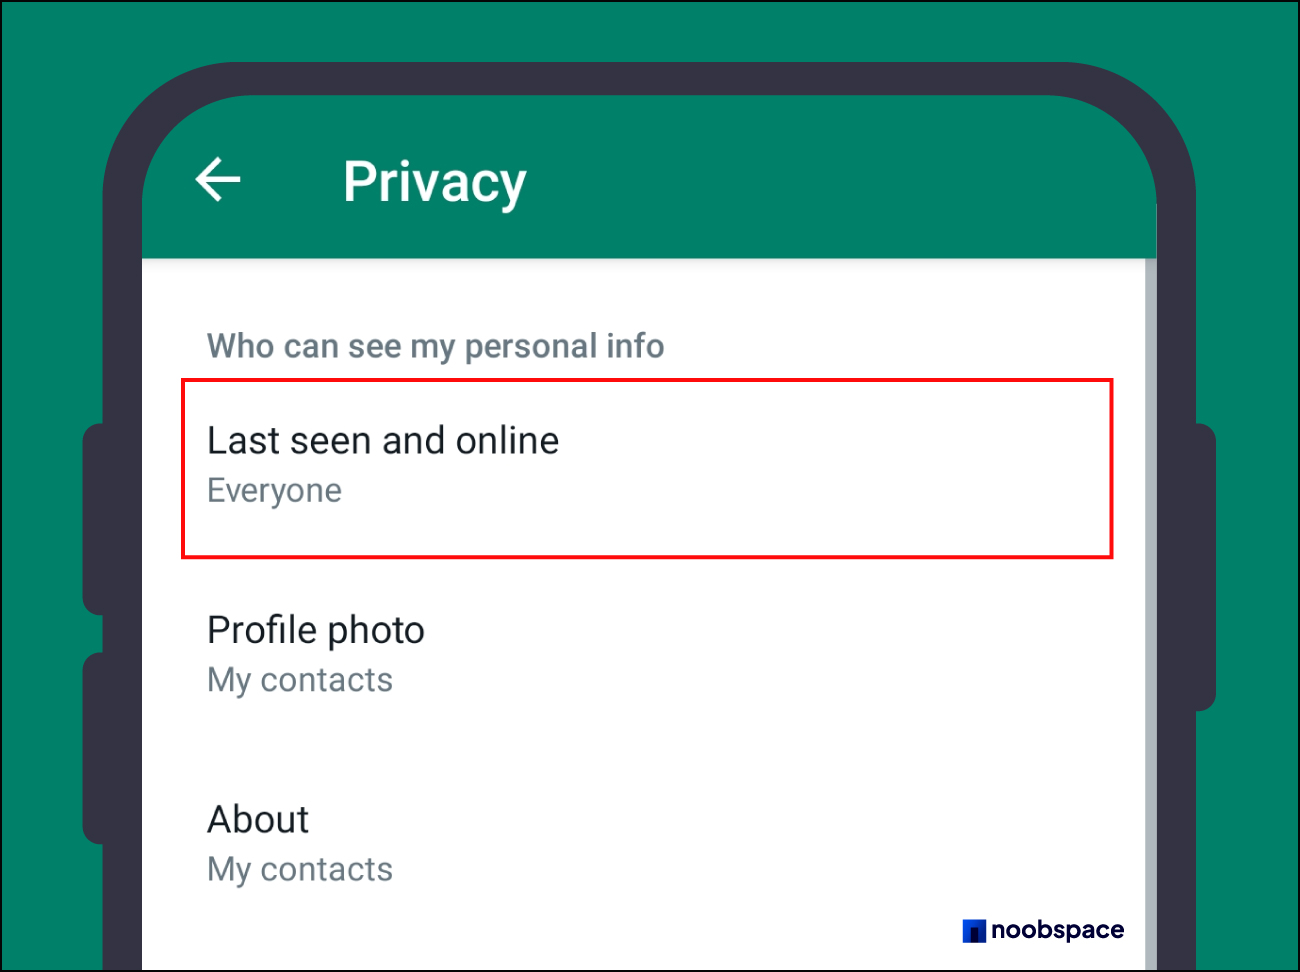 Under Privacy, select 'Last seen and online' in Settings